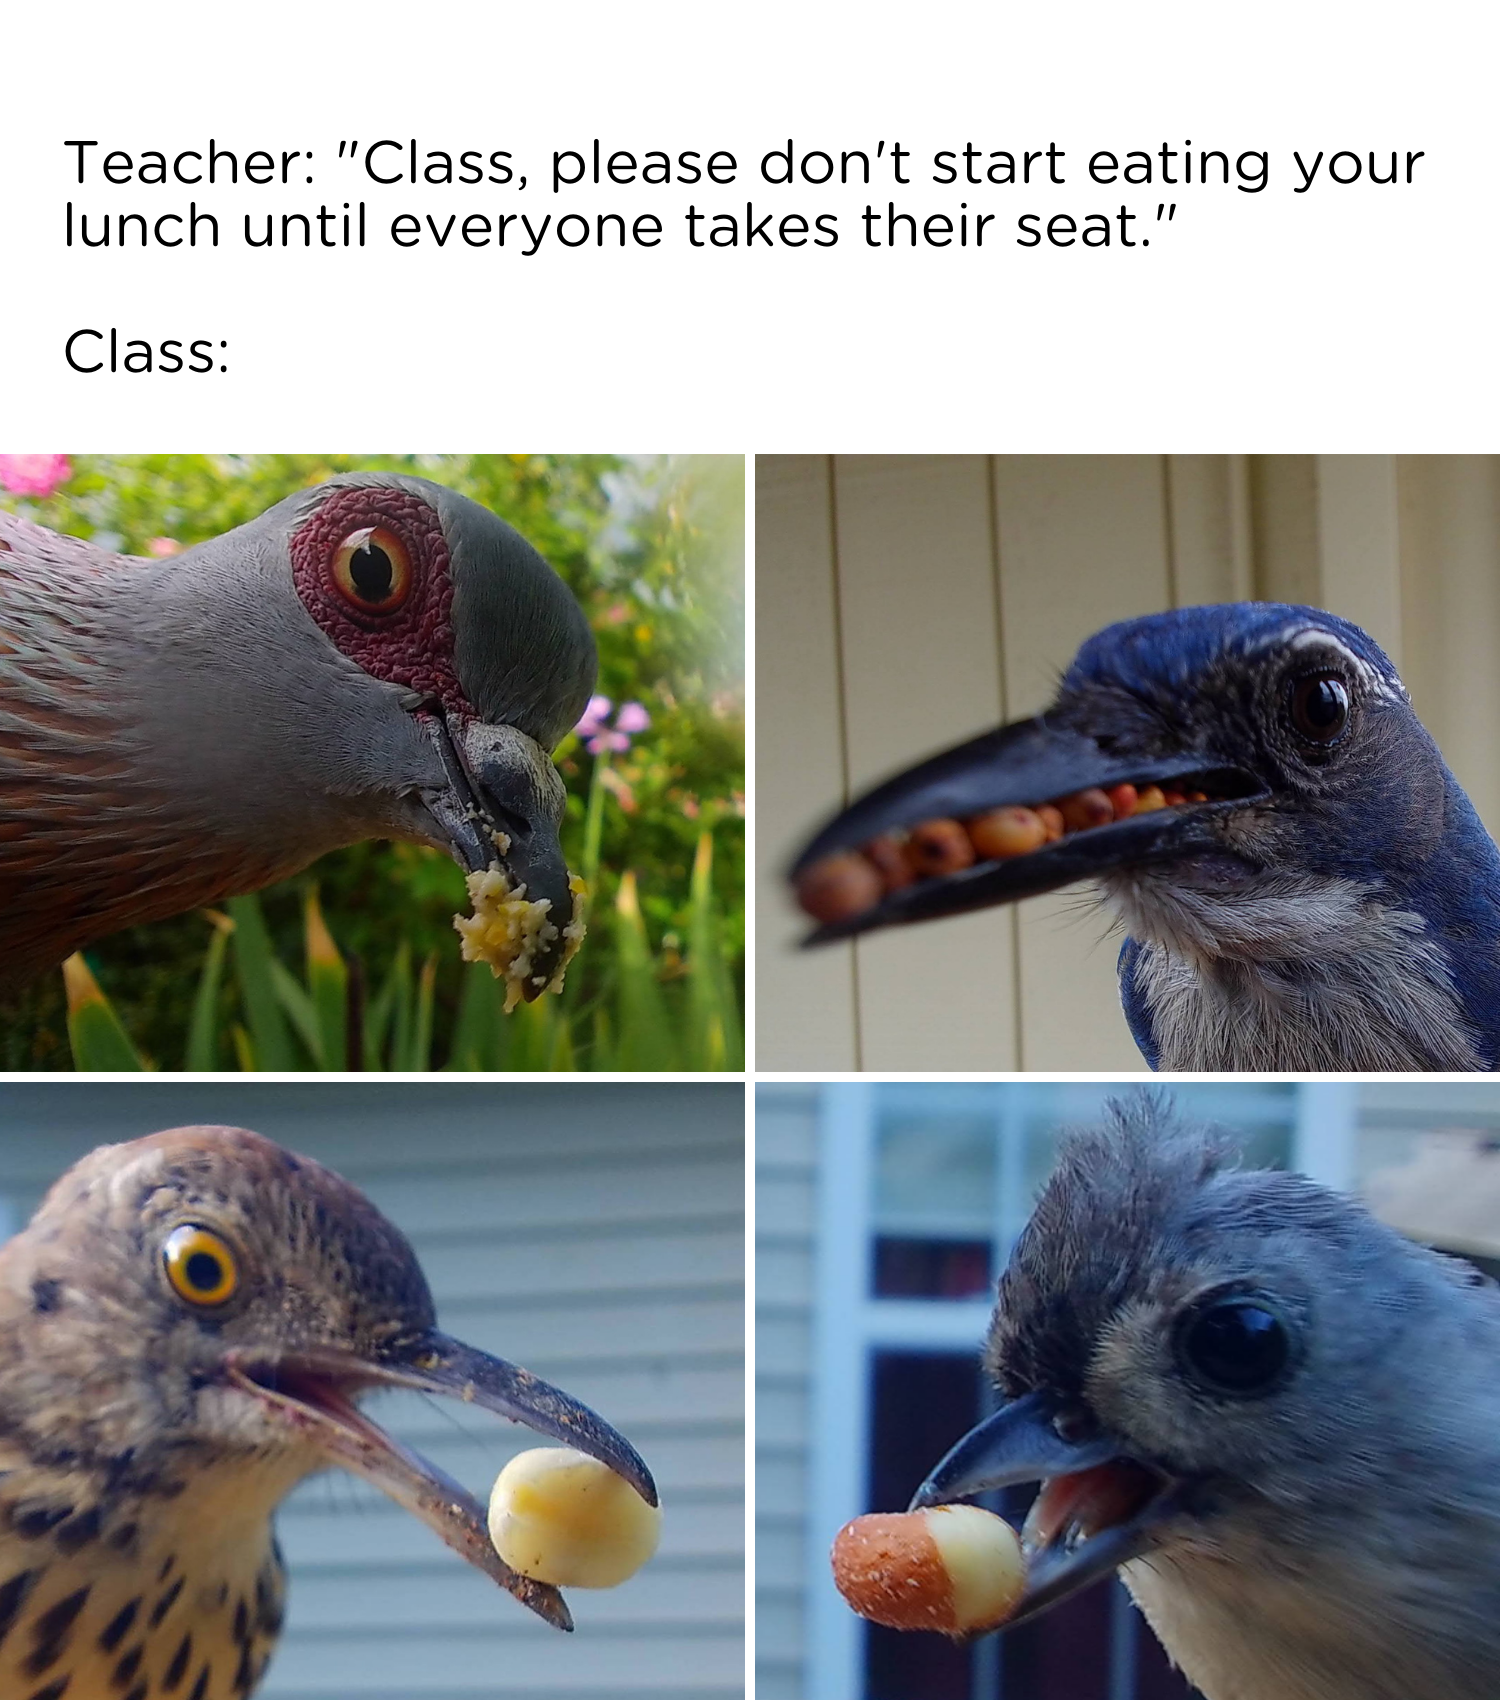 beak - Teacher "Class, please don't start eating your lunch until everyone takes their seat." Class